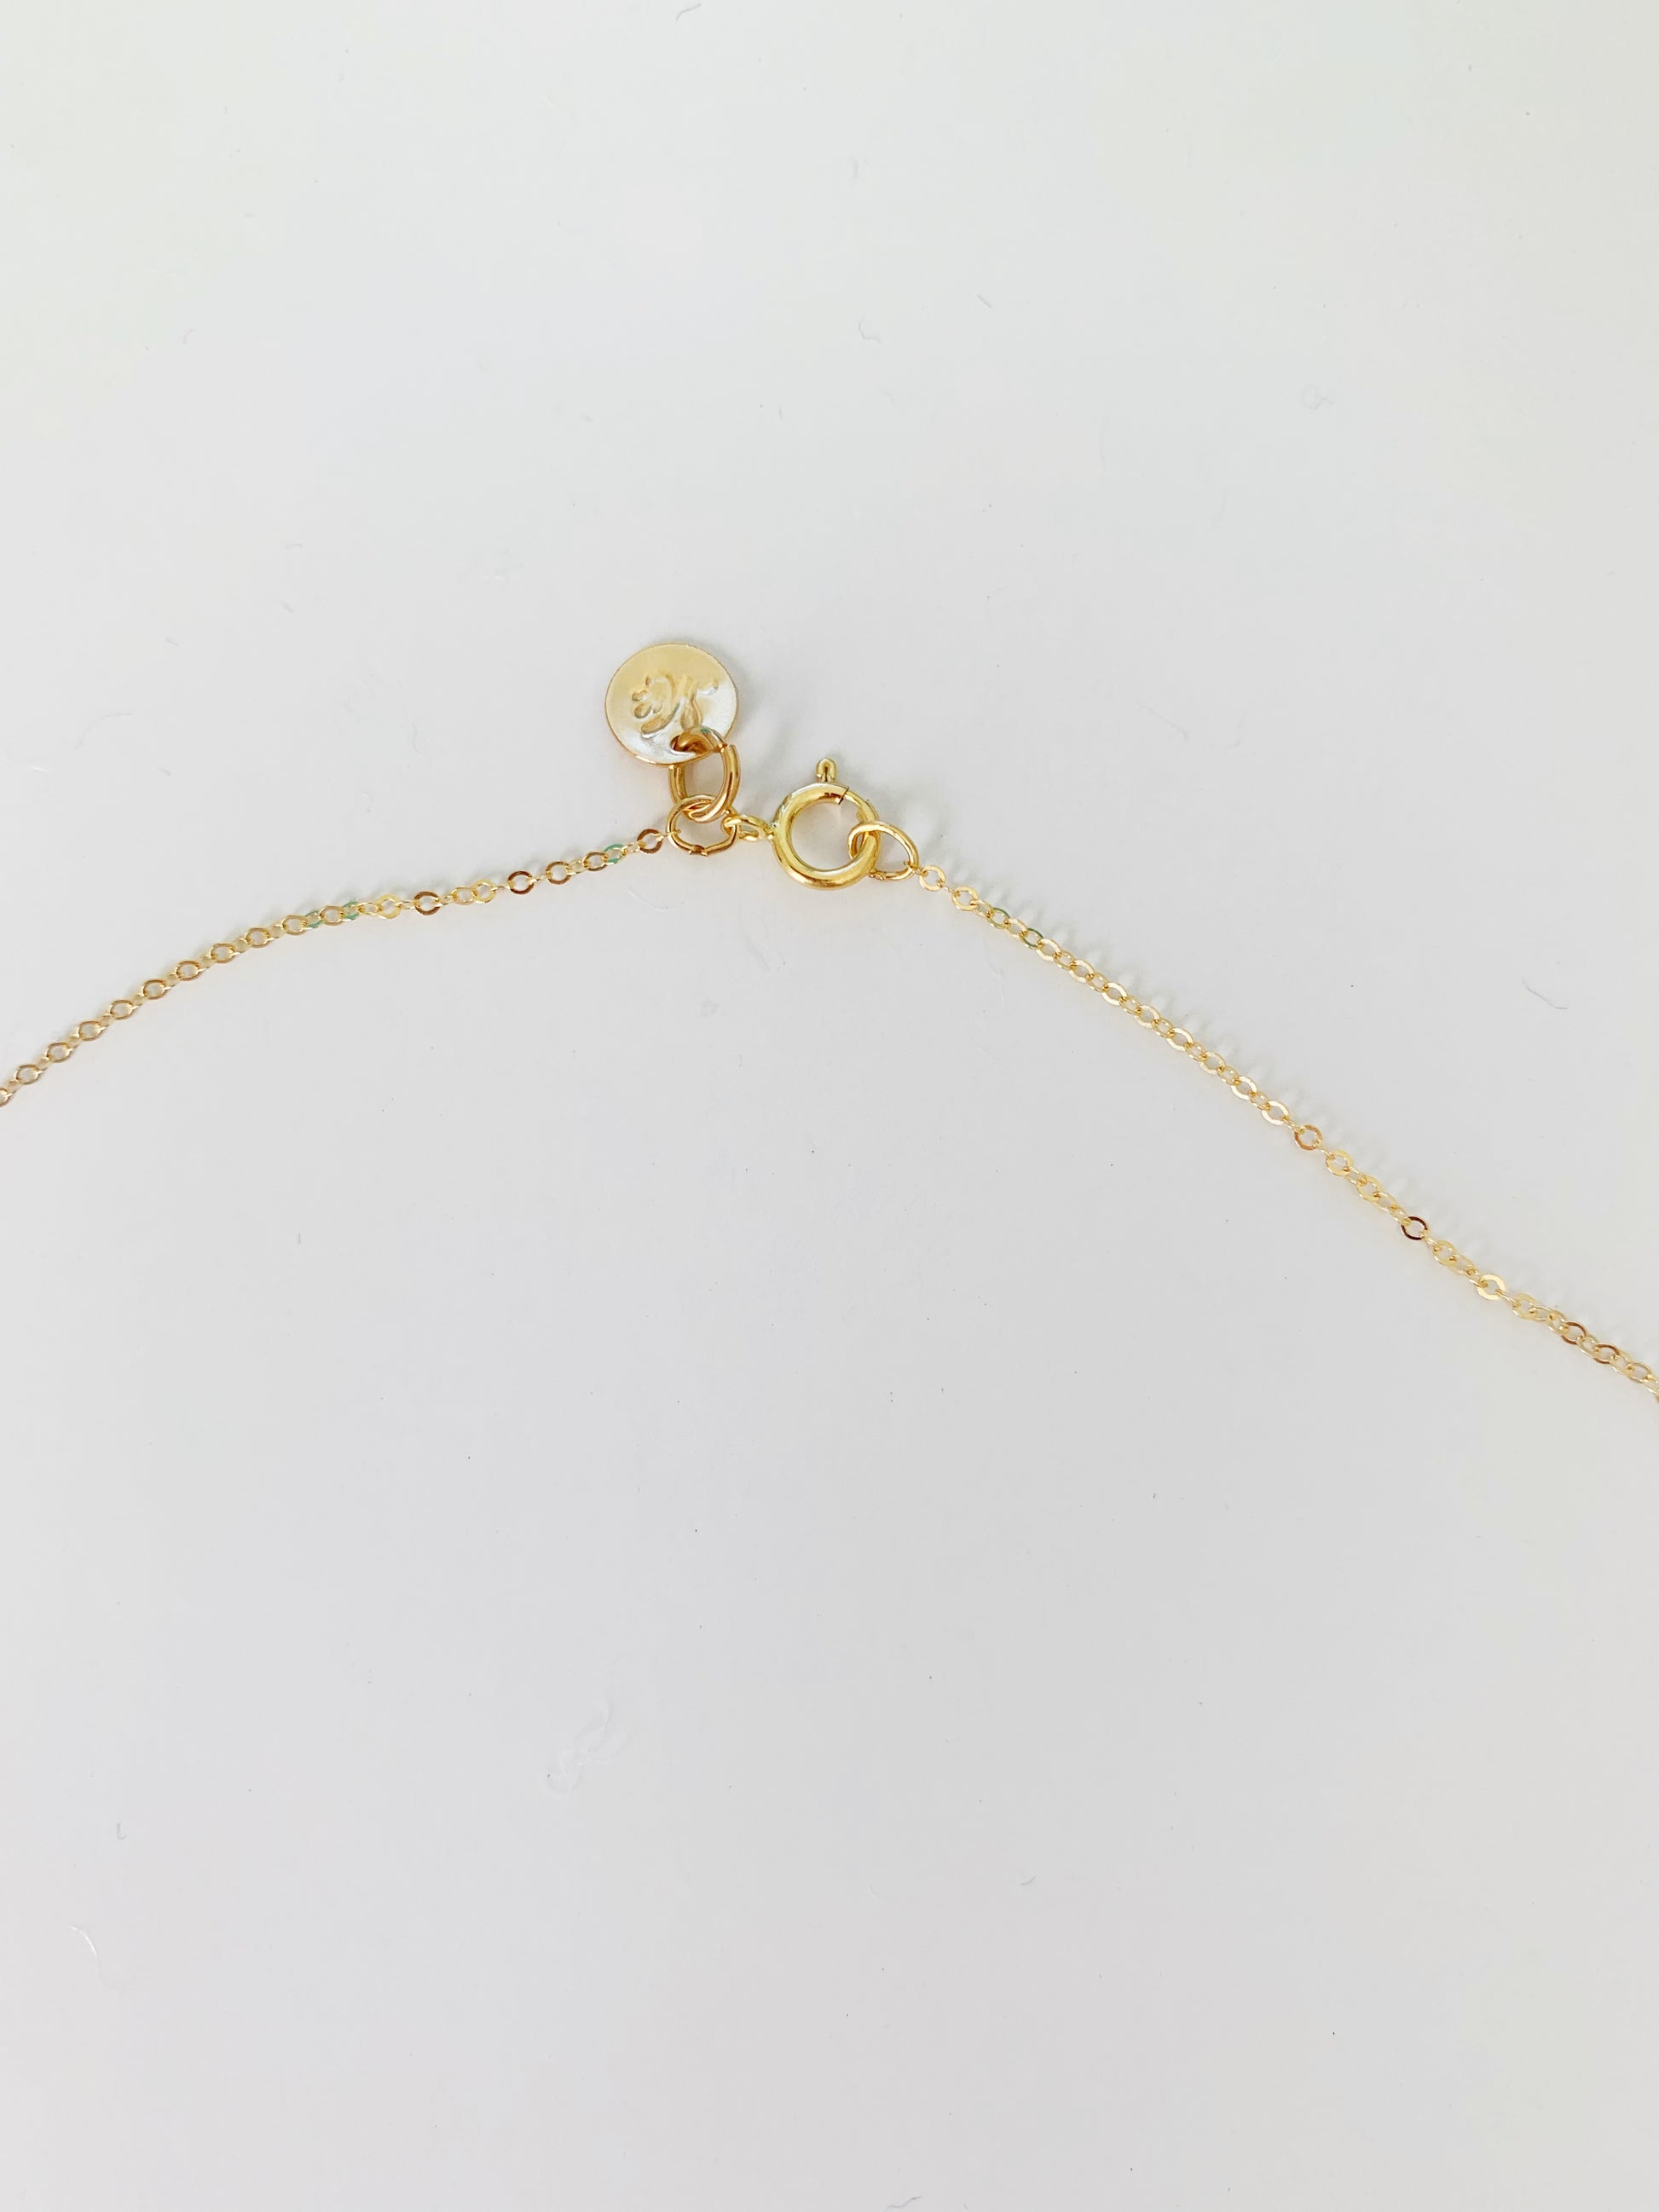 the raindrop necklace in 14k gold filled has a spring ring clasp